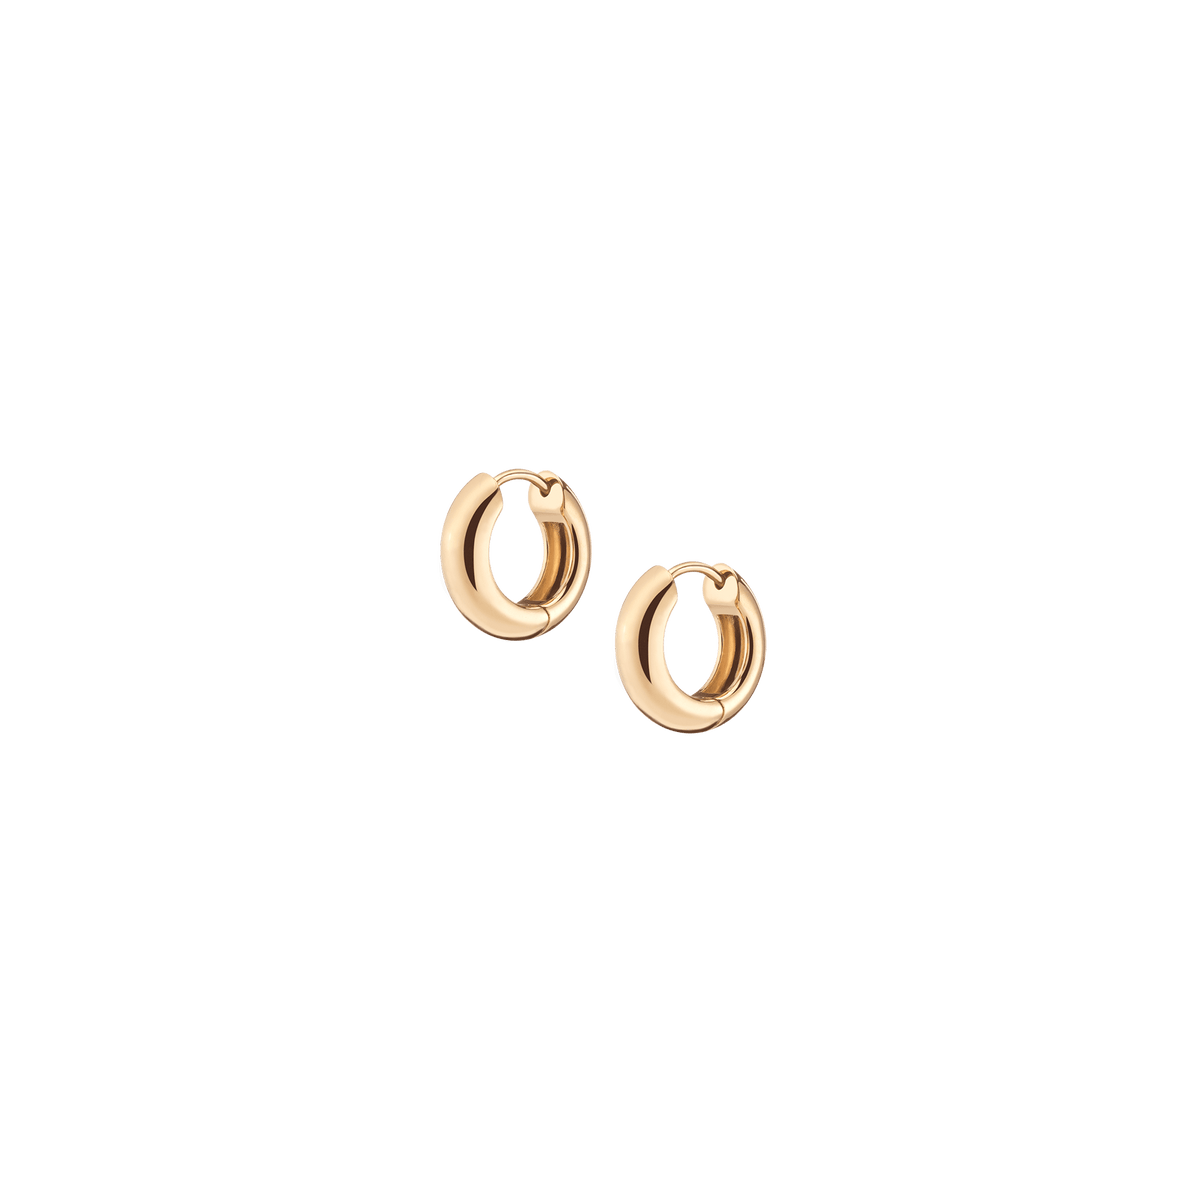 18kt yellow fine gold single stone hoops earring excellent brides made  clip on earring Huggie Hoop Earrings jewelry gifting ho69  TRIBAL  ORNAMENTS